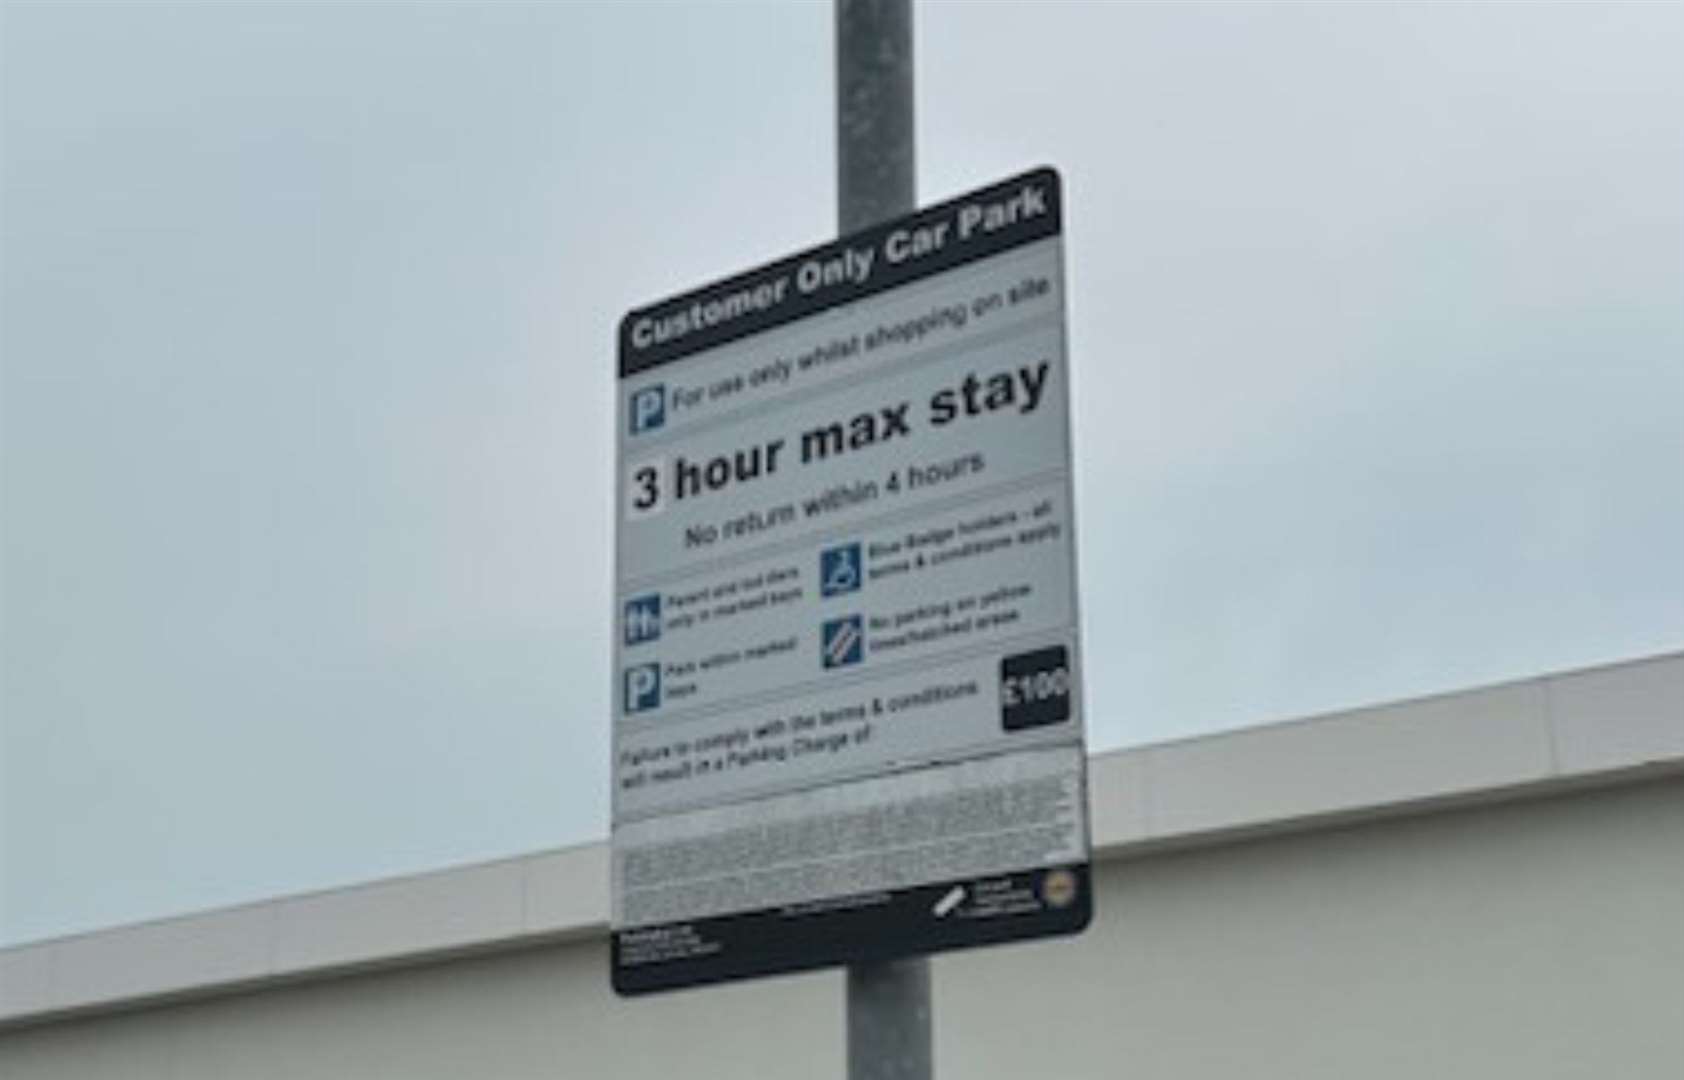 The signs at the retail park say there is a three hour maximum stay and no return within four hours policy. Picture: Sarah Short